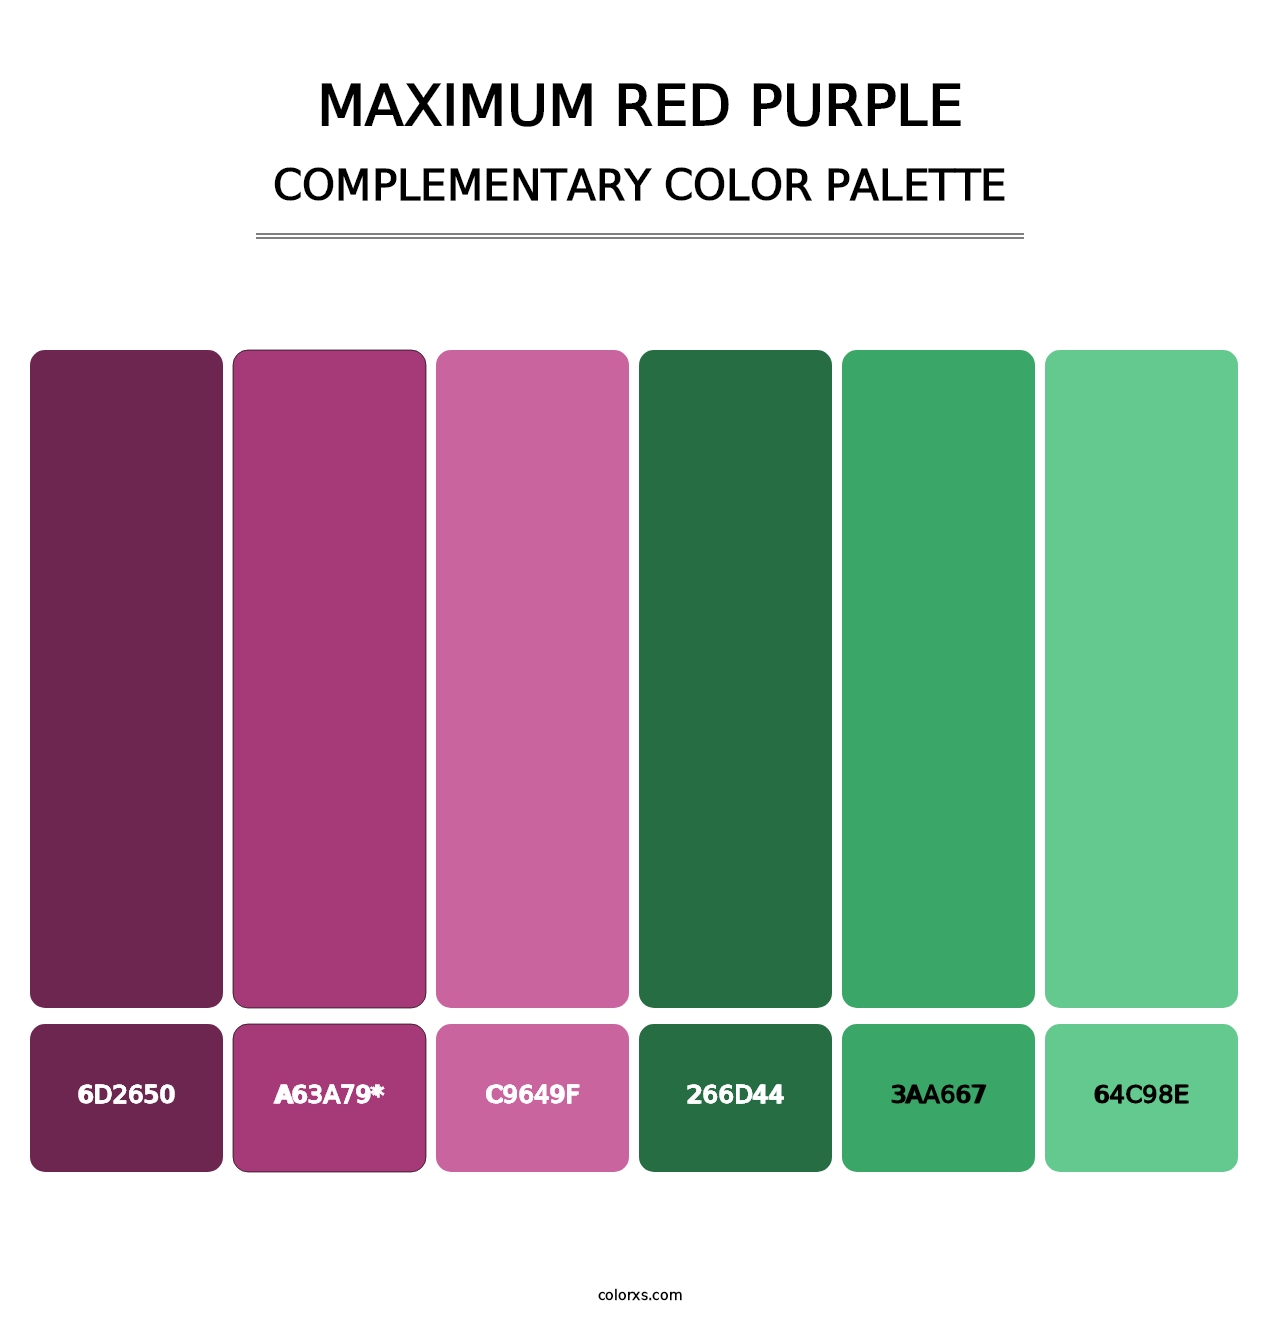 Maximum Red Purple - Complementary Color Palette